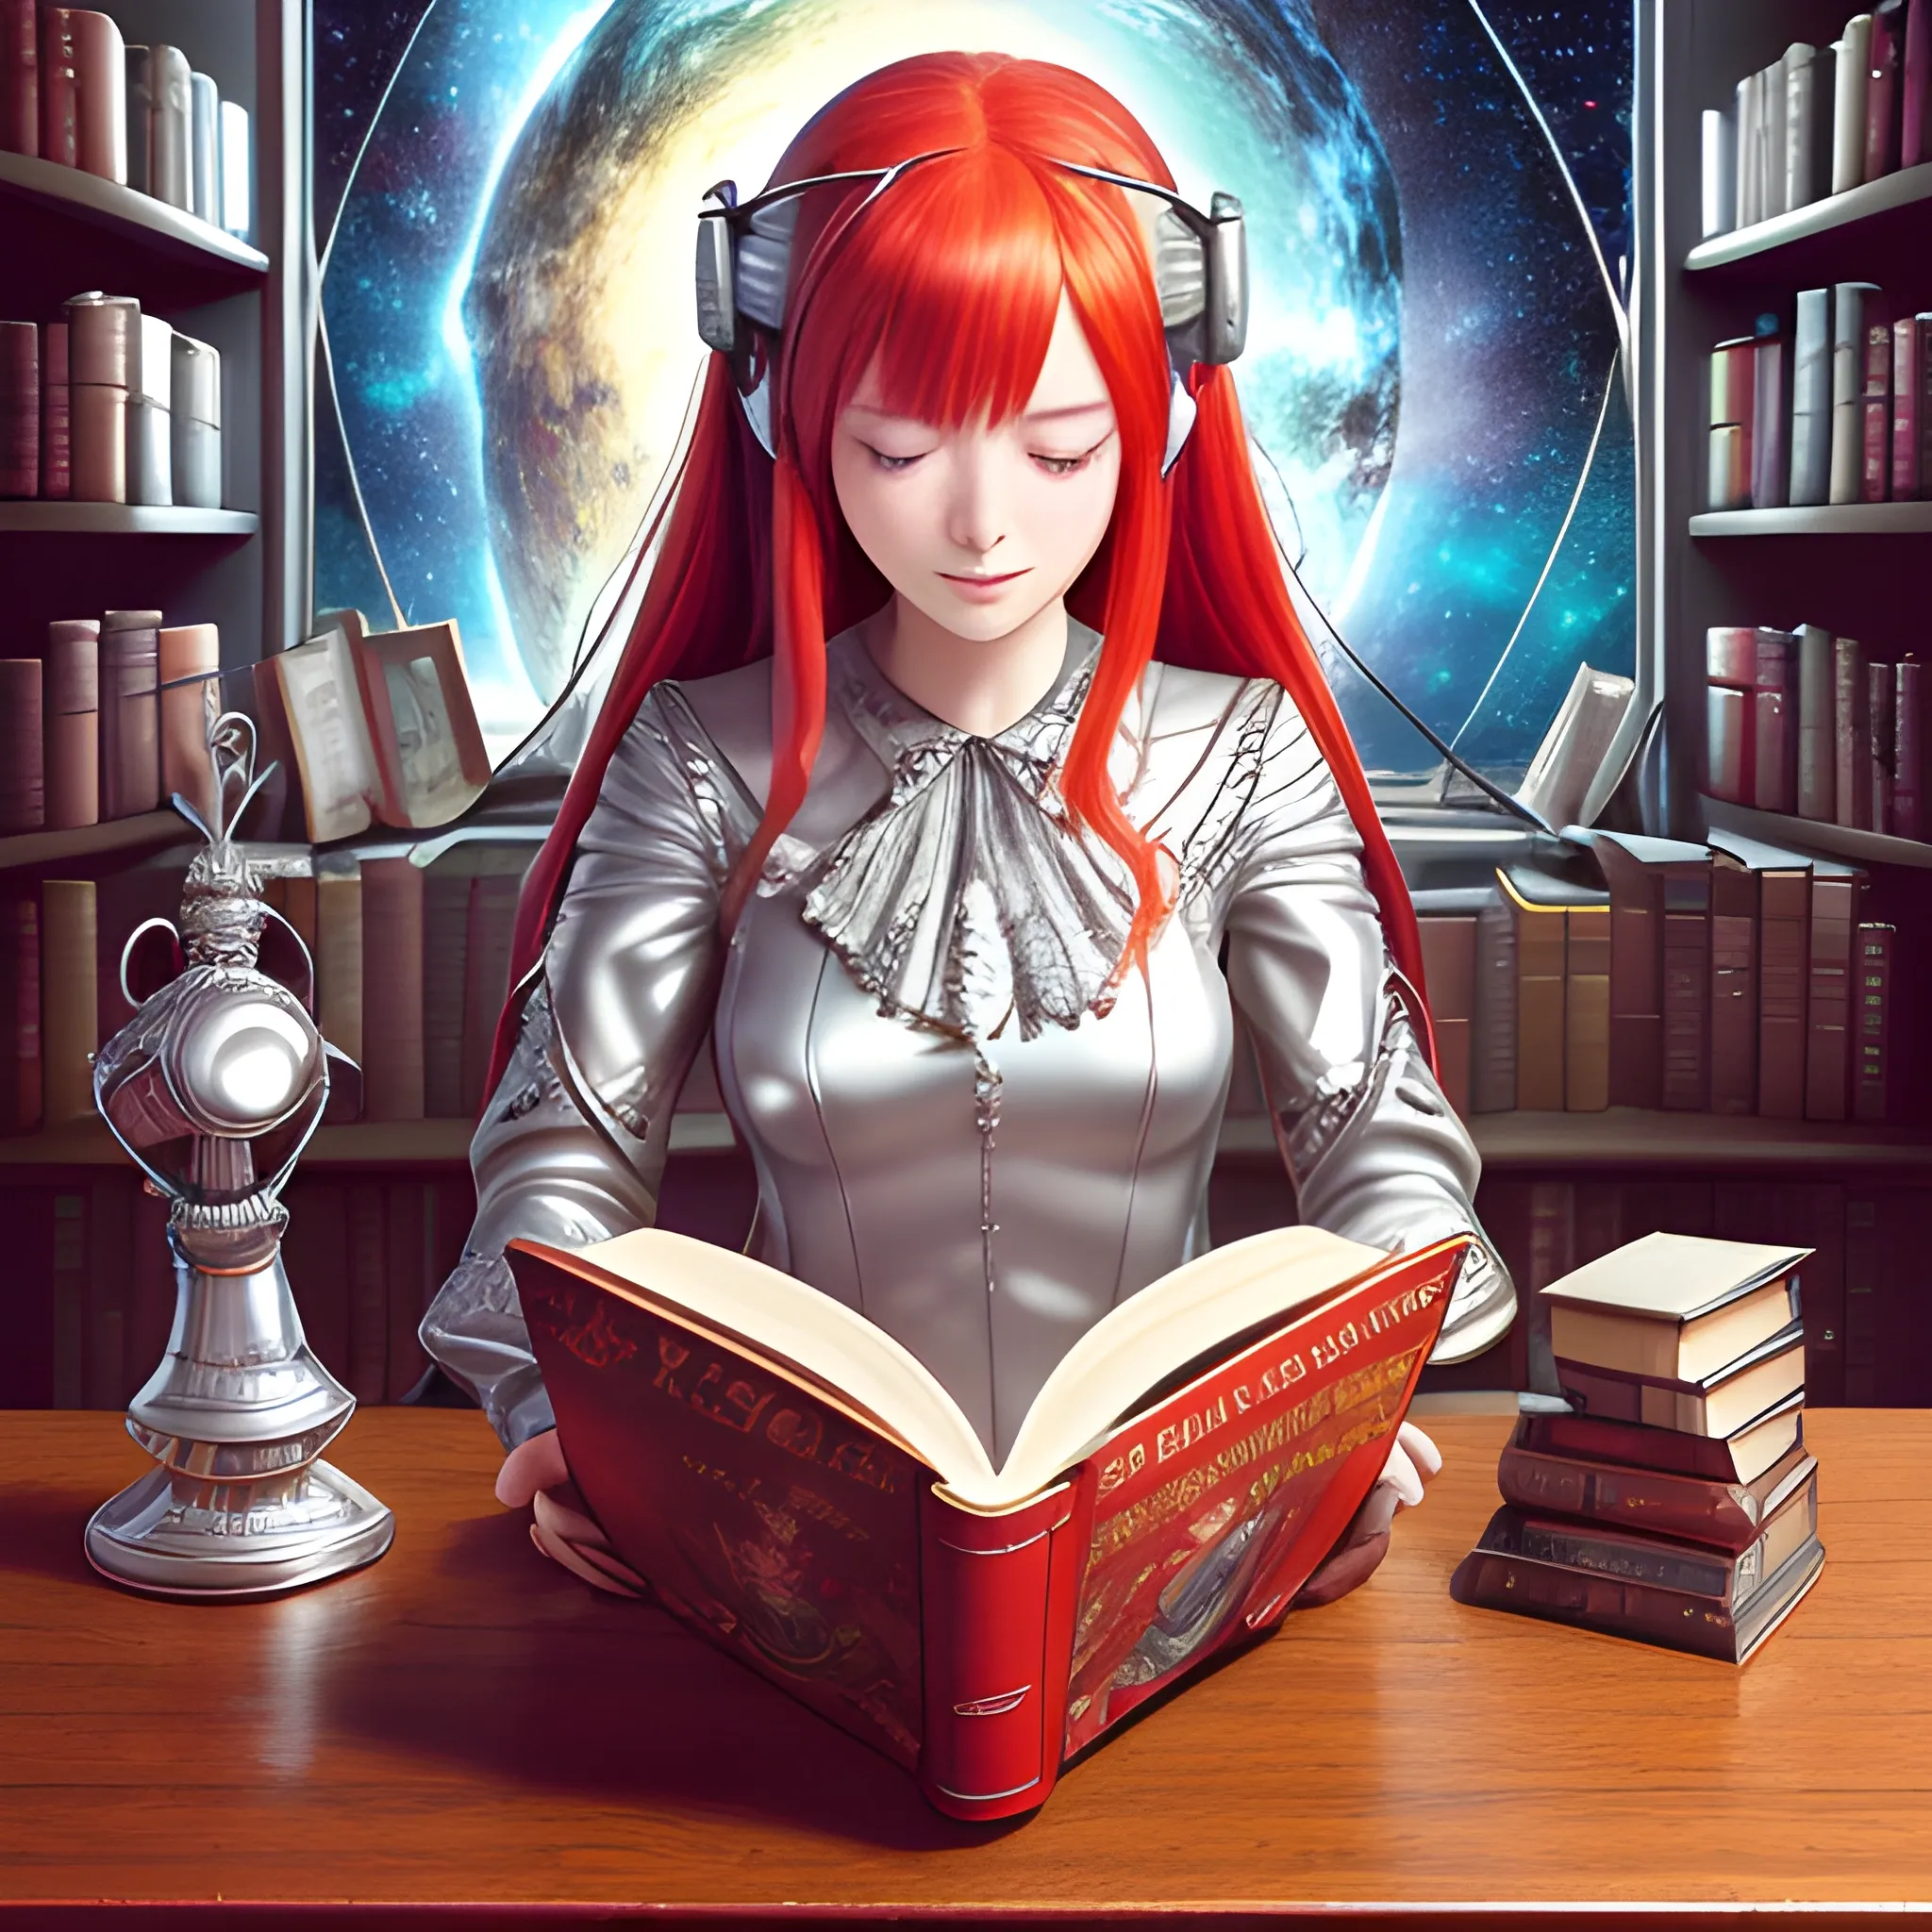 (((high detail))), best quality, (detailed), (high resolution) silver universe, books, books on a table, shelf with some books, studio ghiblin, anime, galaxy in the sky, woman reading a book ,red hair, red dress, black eyes, listen to music 
 
, Trippy, 
